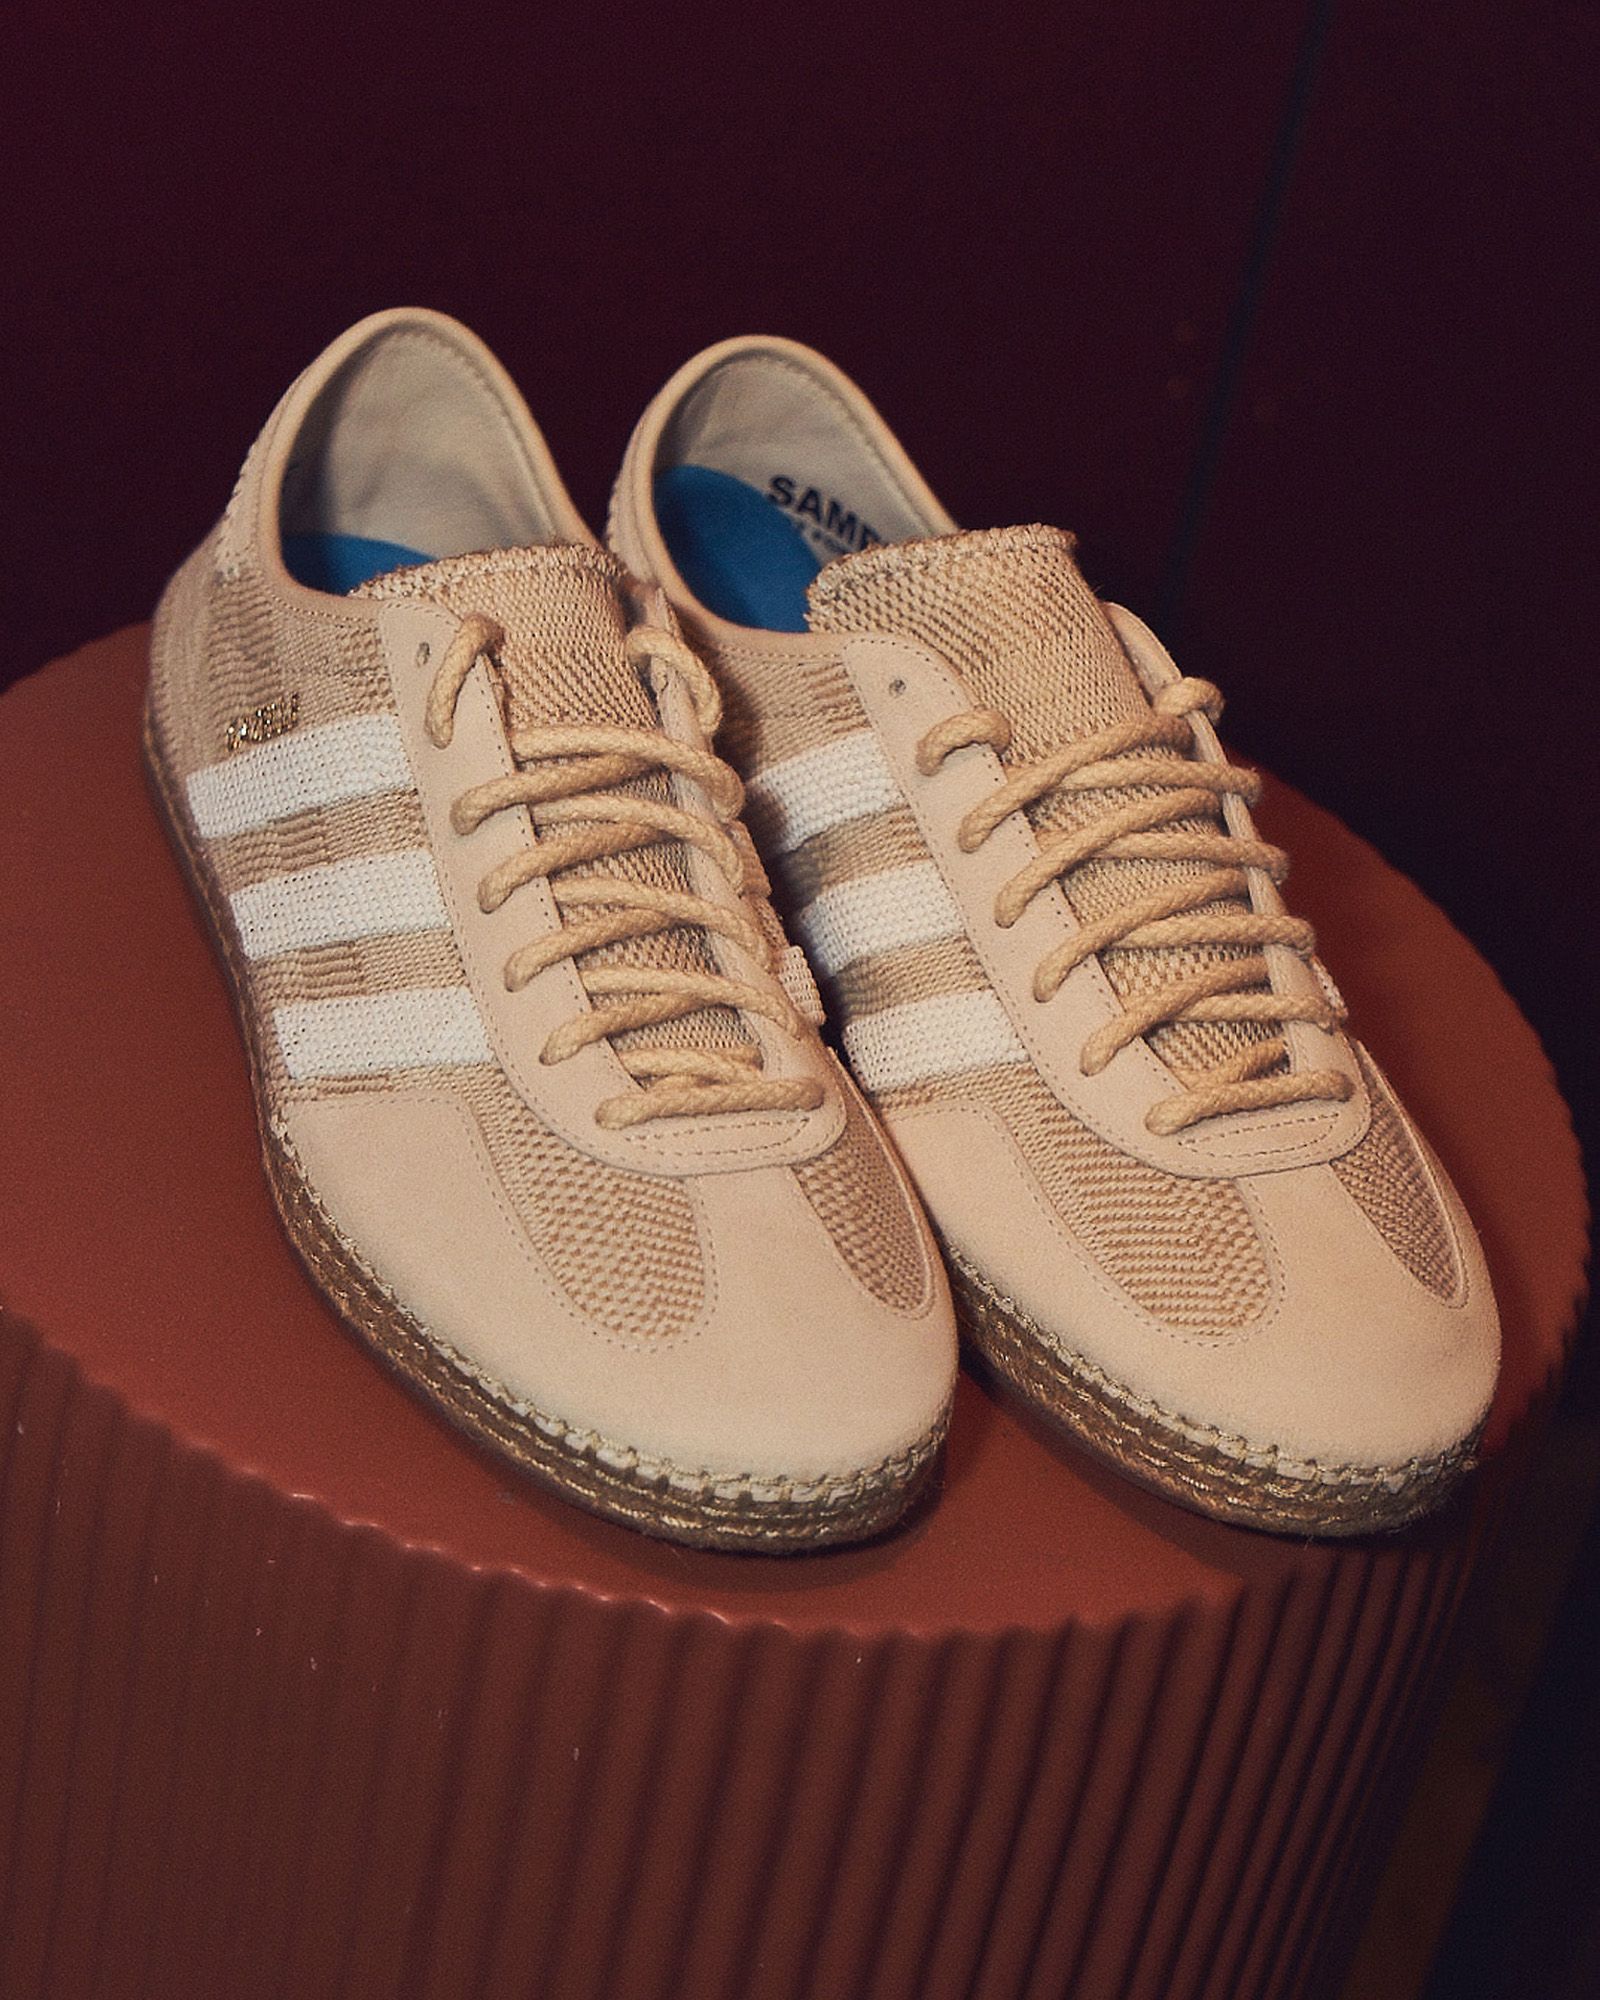 The CLOT x Adidas Gazelle by Edison Chen Releases in June | House of Heat°